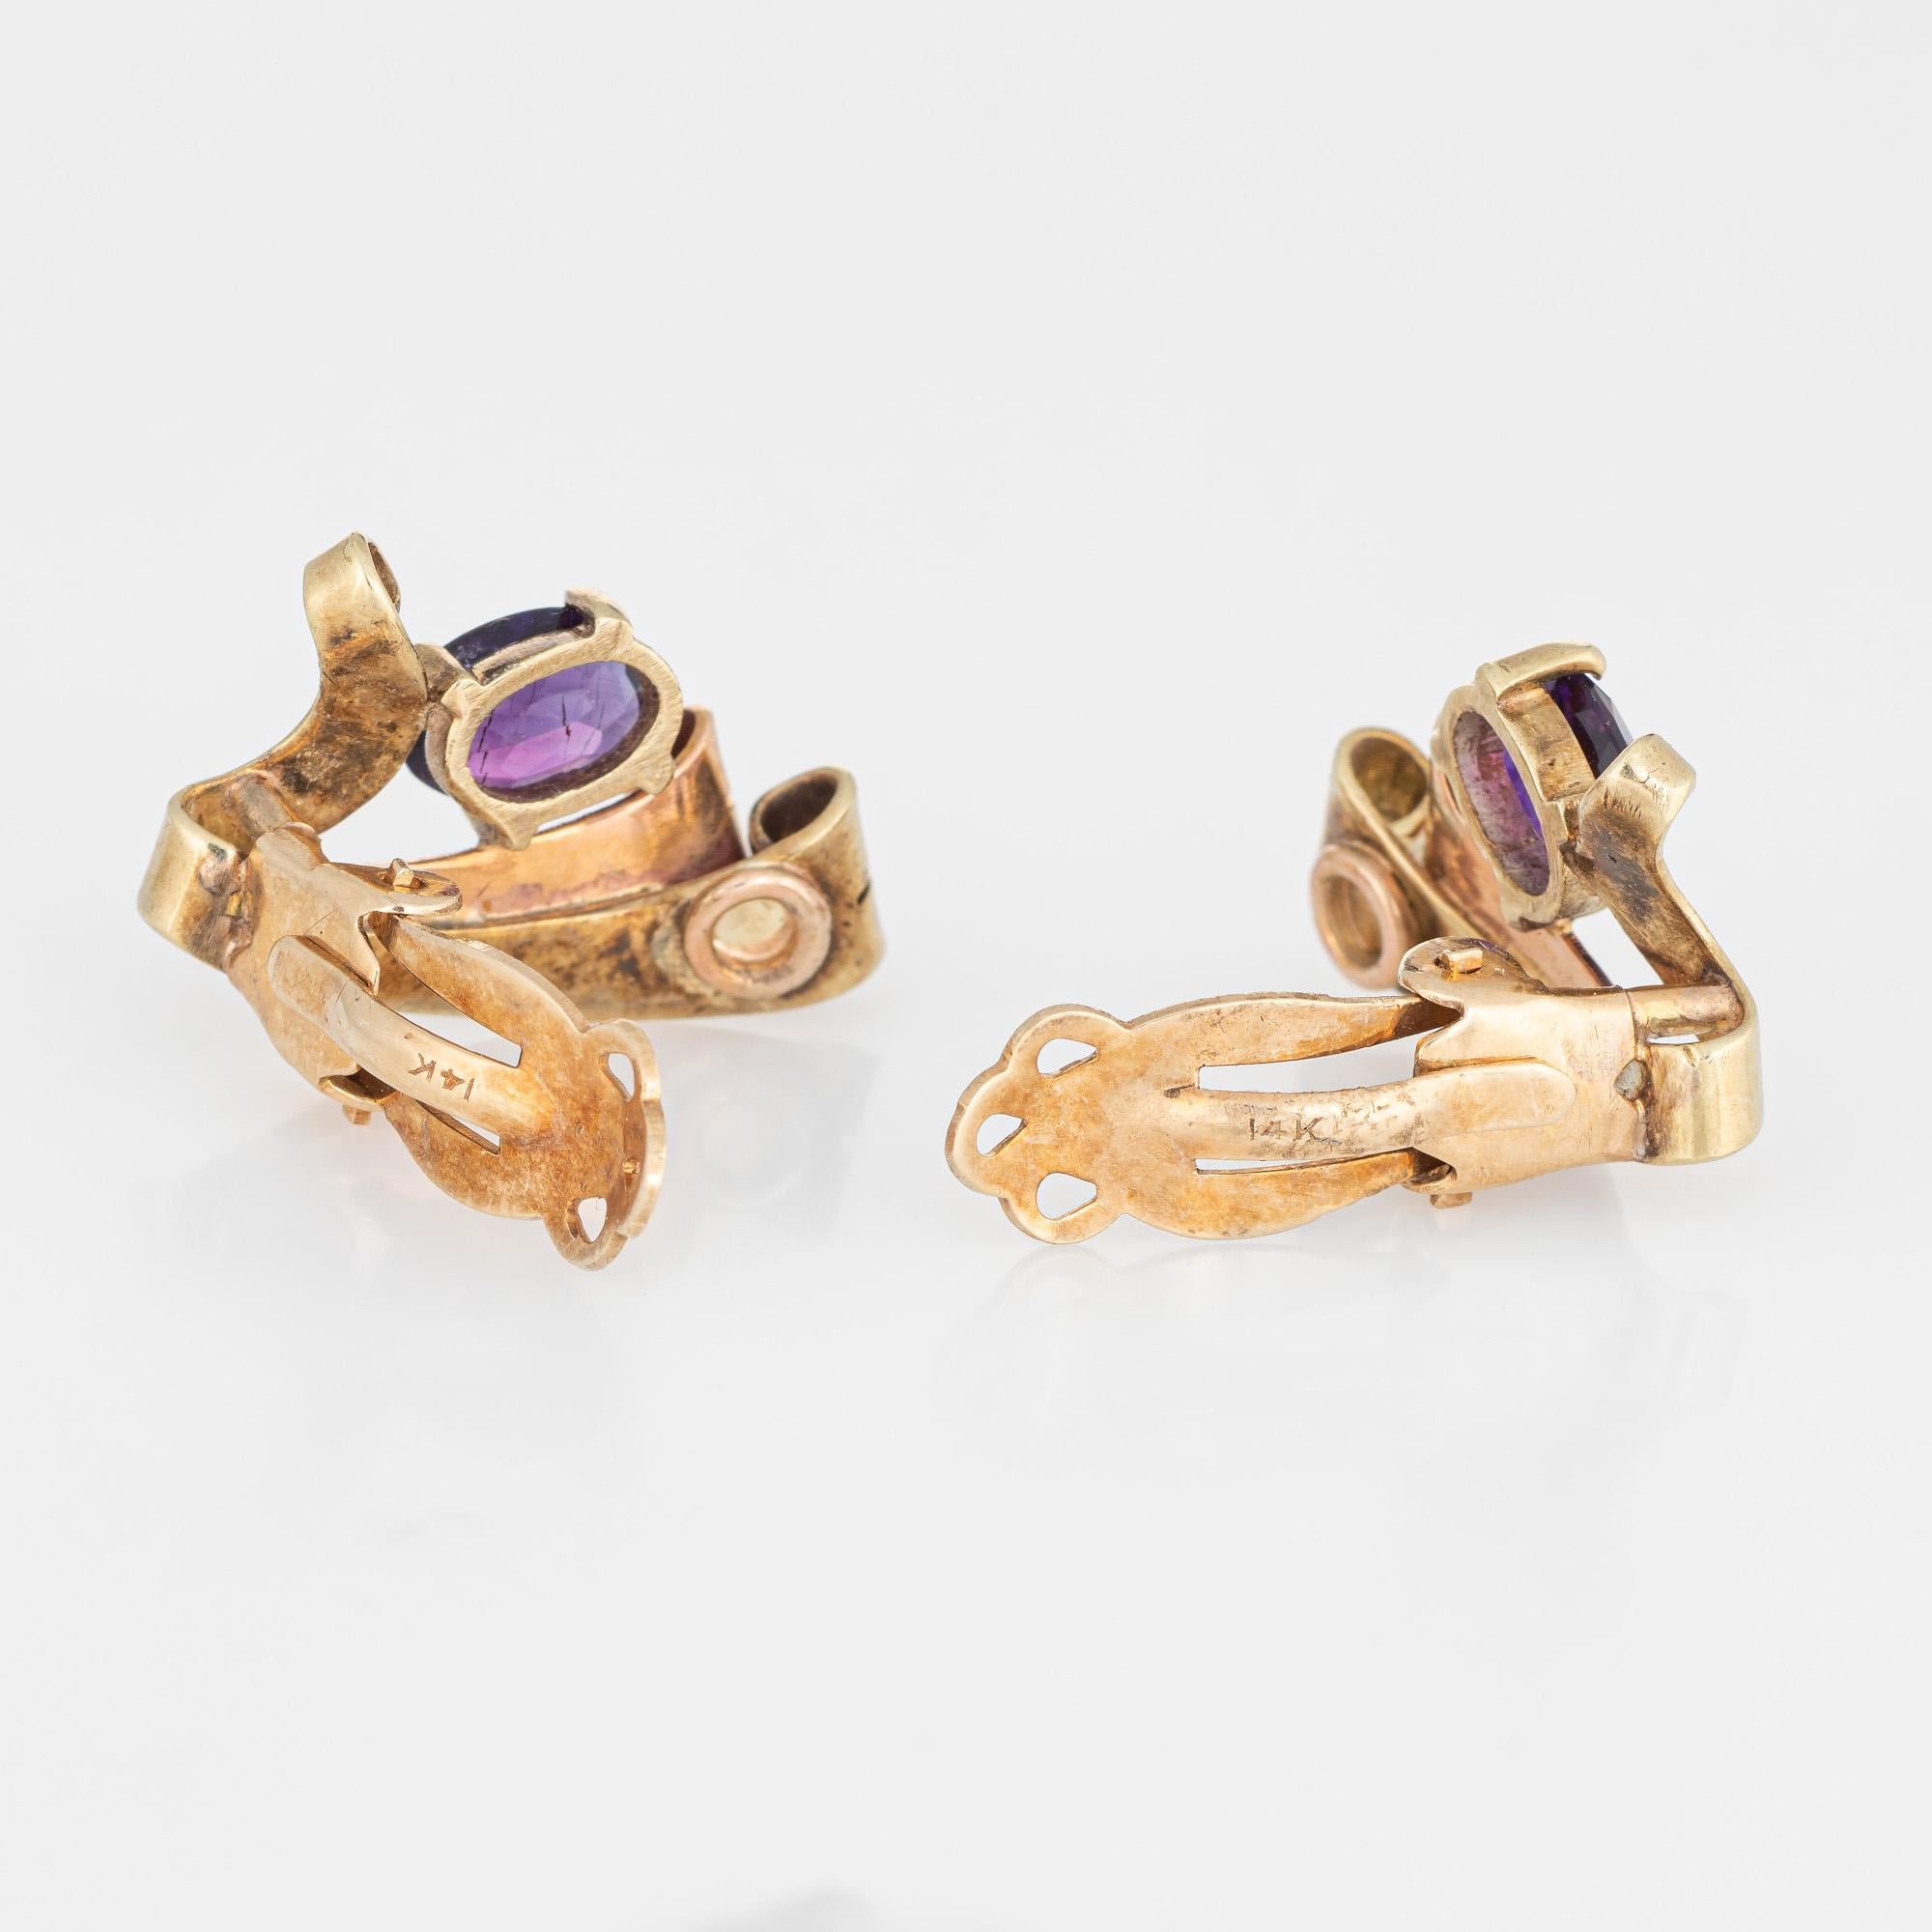 Elegant pair of retro vintage amethyst earrings (circa 1940s) crafted in 14k yellow & rose gold. 

Oval cut amethysts each measure 7mm x 5mm (0.65 carats each - 1.30 carats total estimated weight). The amethysts are in very good condition and free